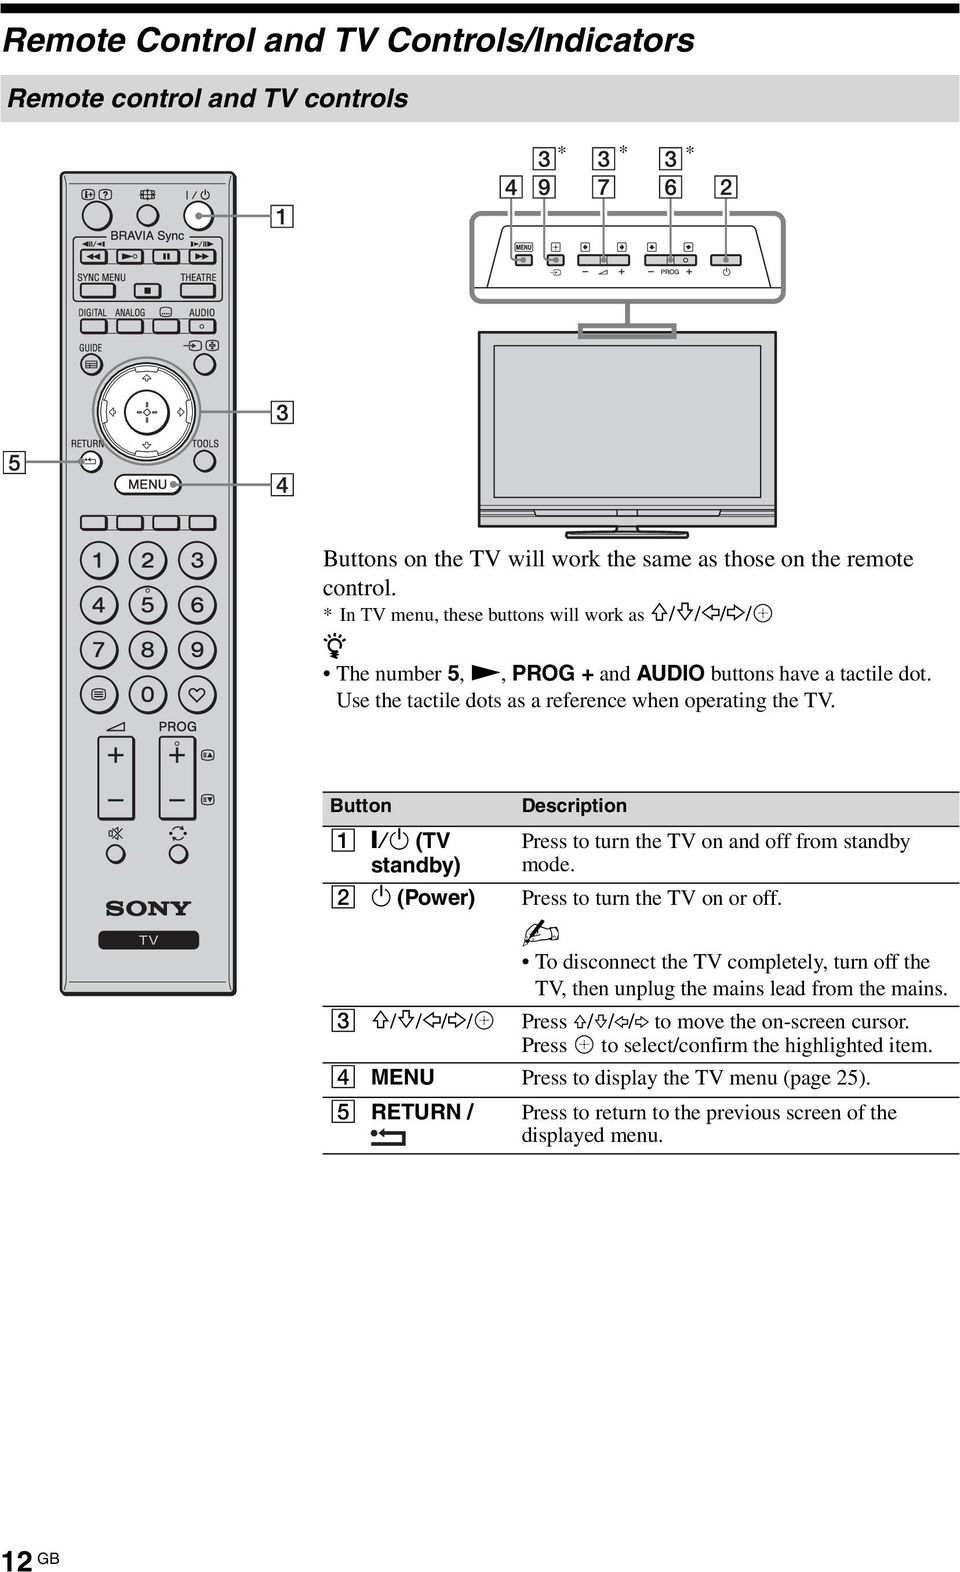 Button 1 "/1 (TV standby) Description Press to turn the TV on and off from standby mode. 2 1 (Power) Press to turn the TV on or off.